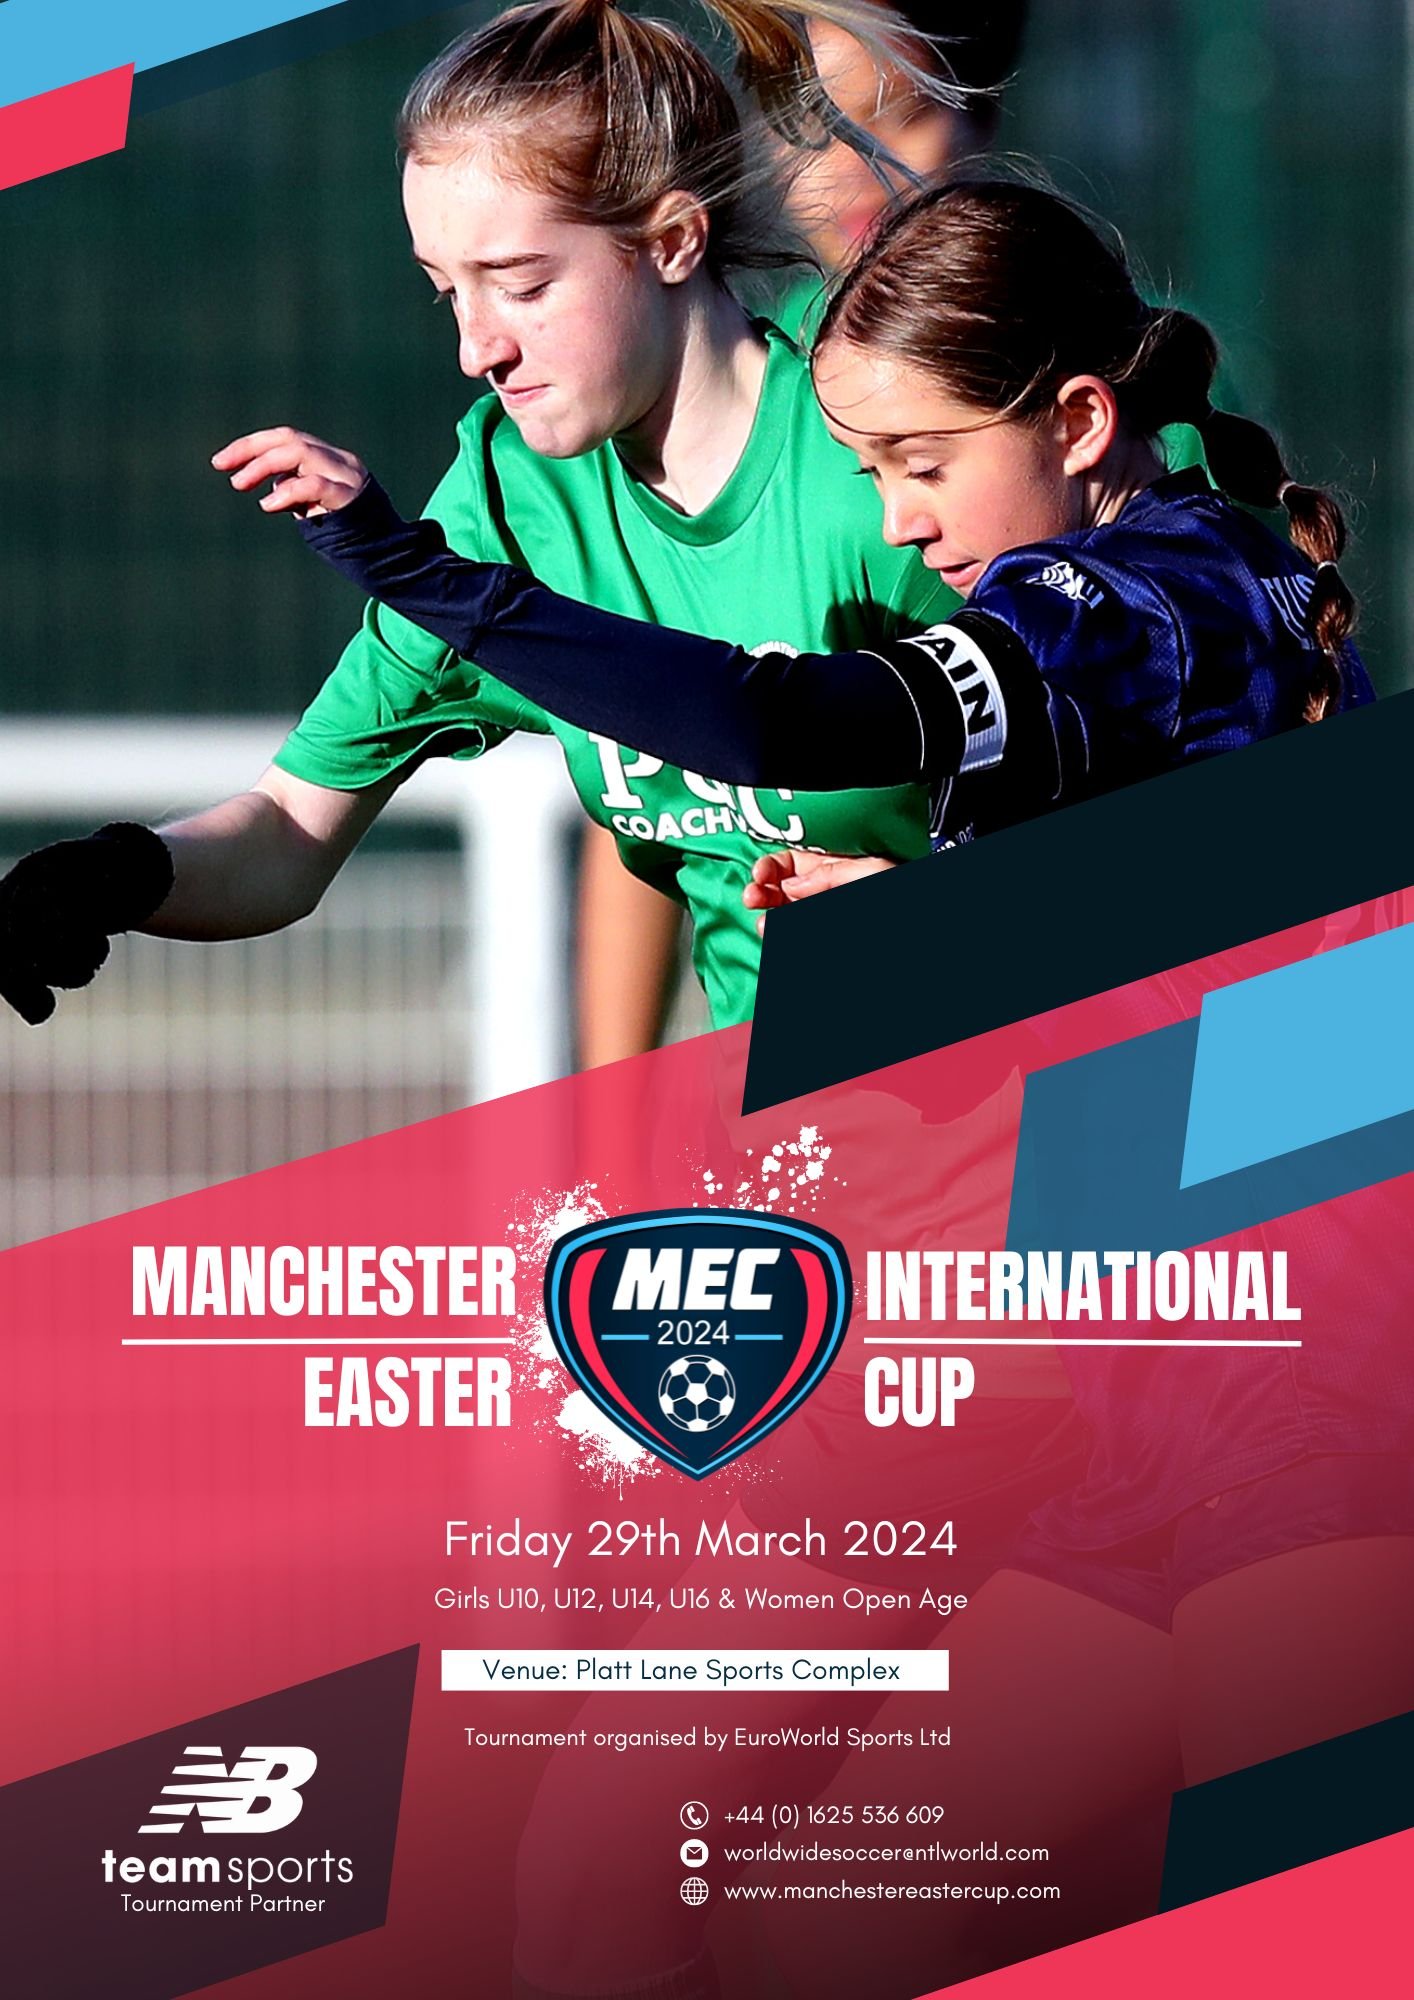 2024 Manchester Easter International Cup